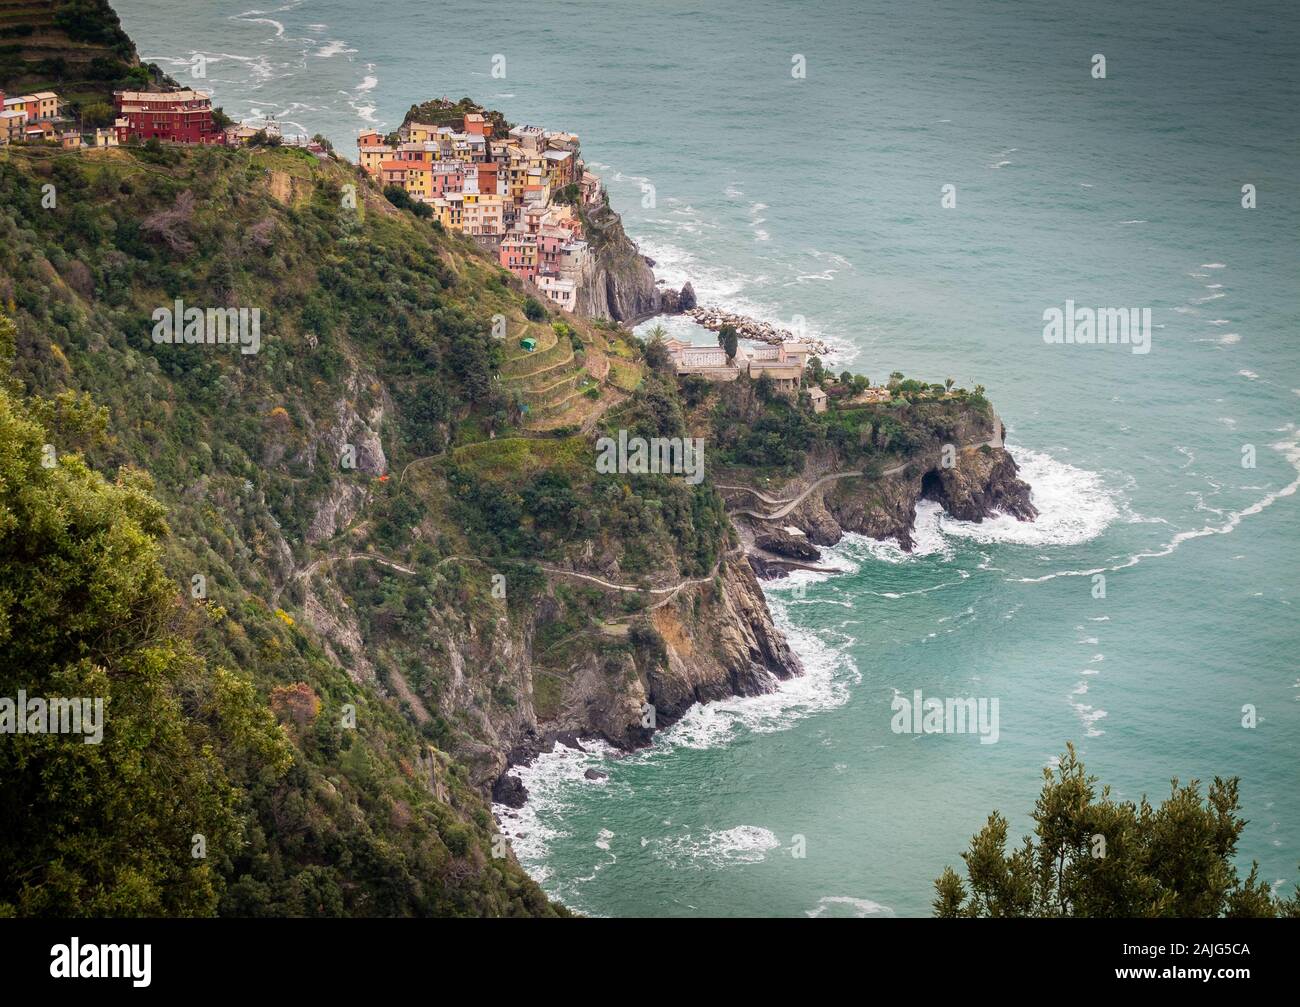 Manarola, Cinque Terre (Five Lands), Liguria, Italy: Aerial view of a village perched on a hill, typical colorful houses. UNESCO World Heritage Site Stock Photo